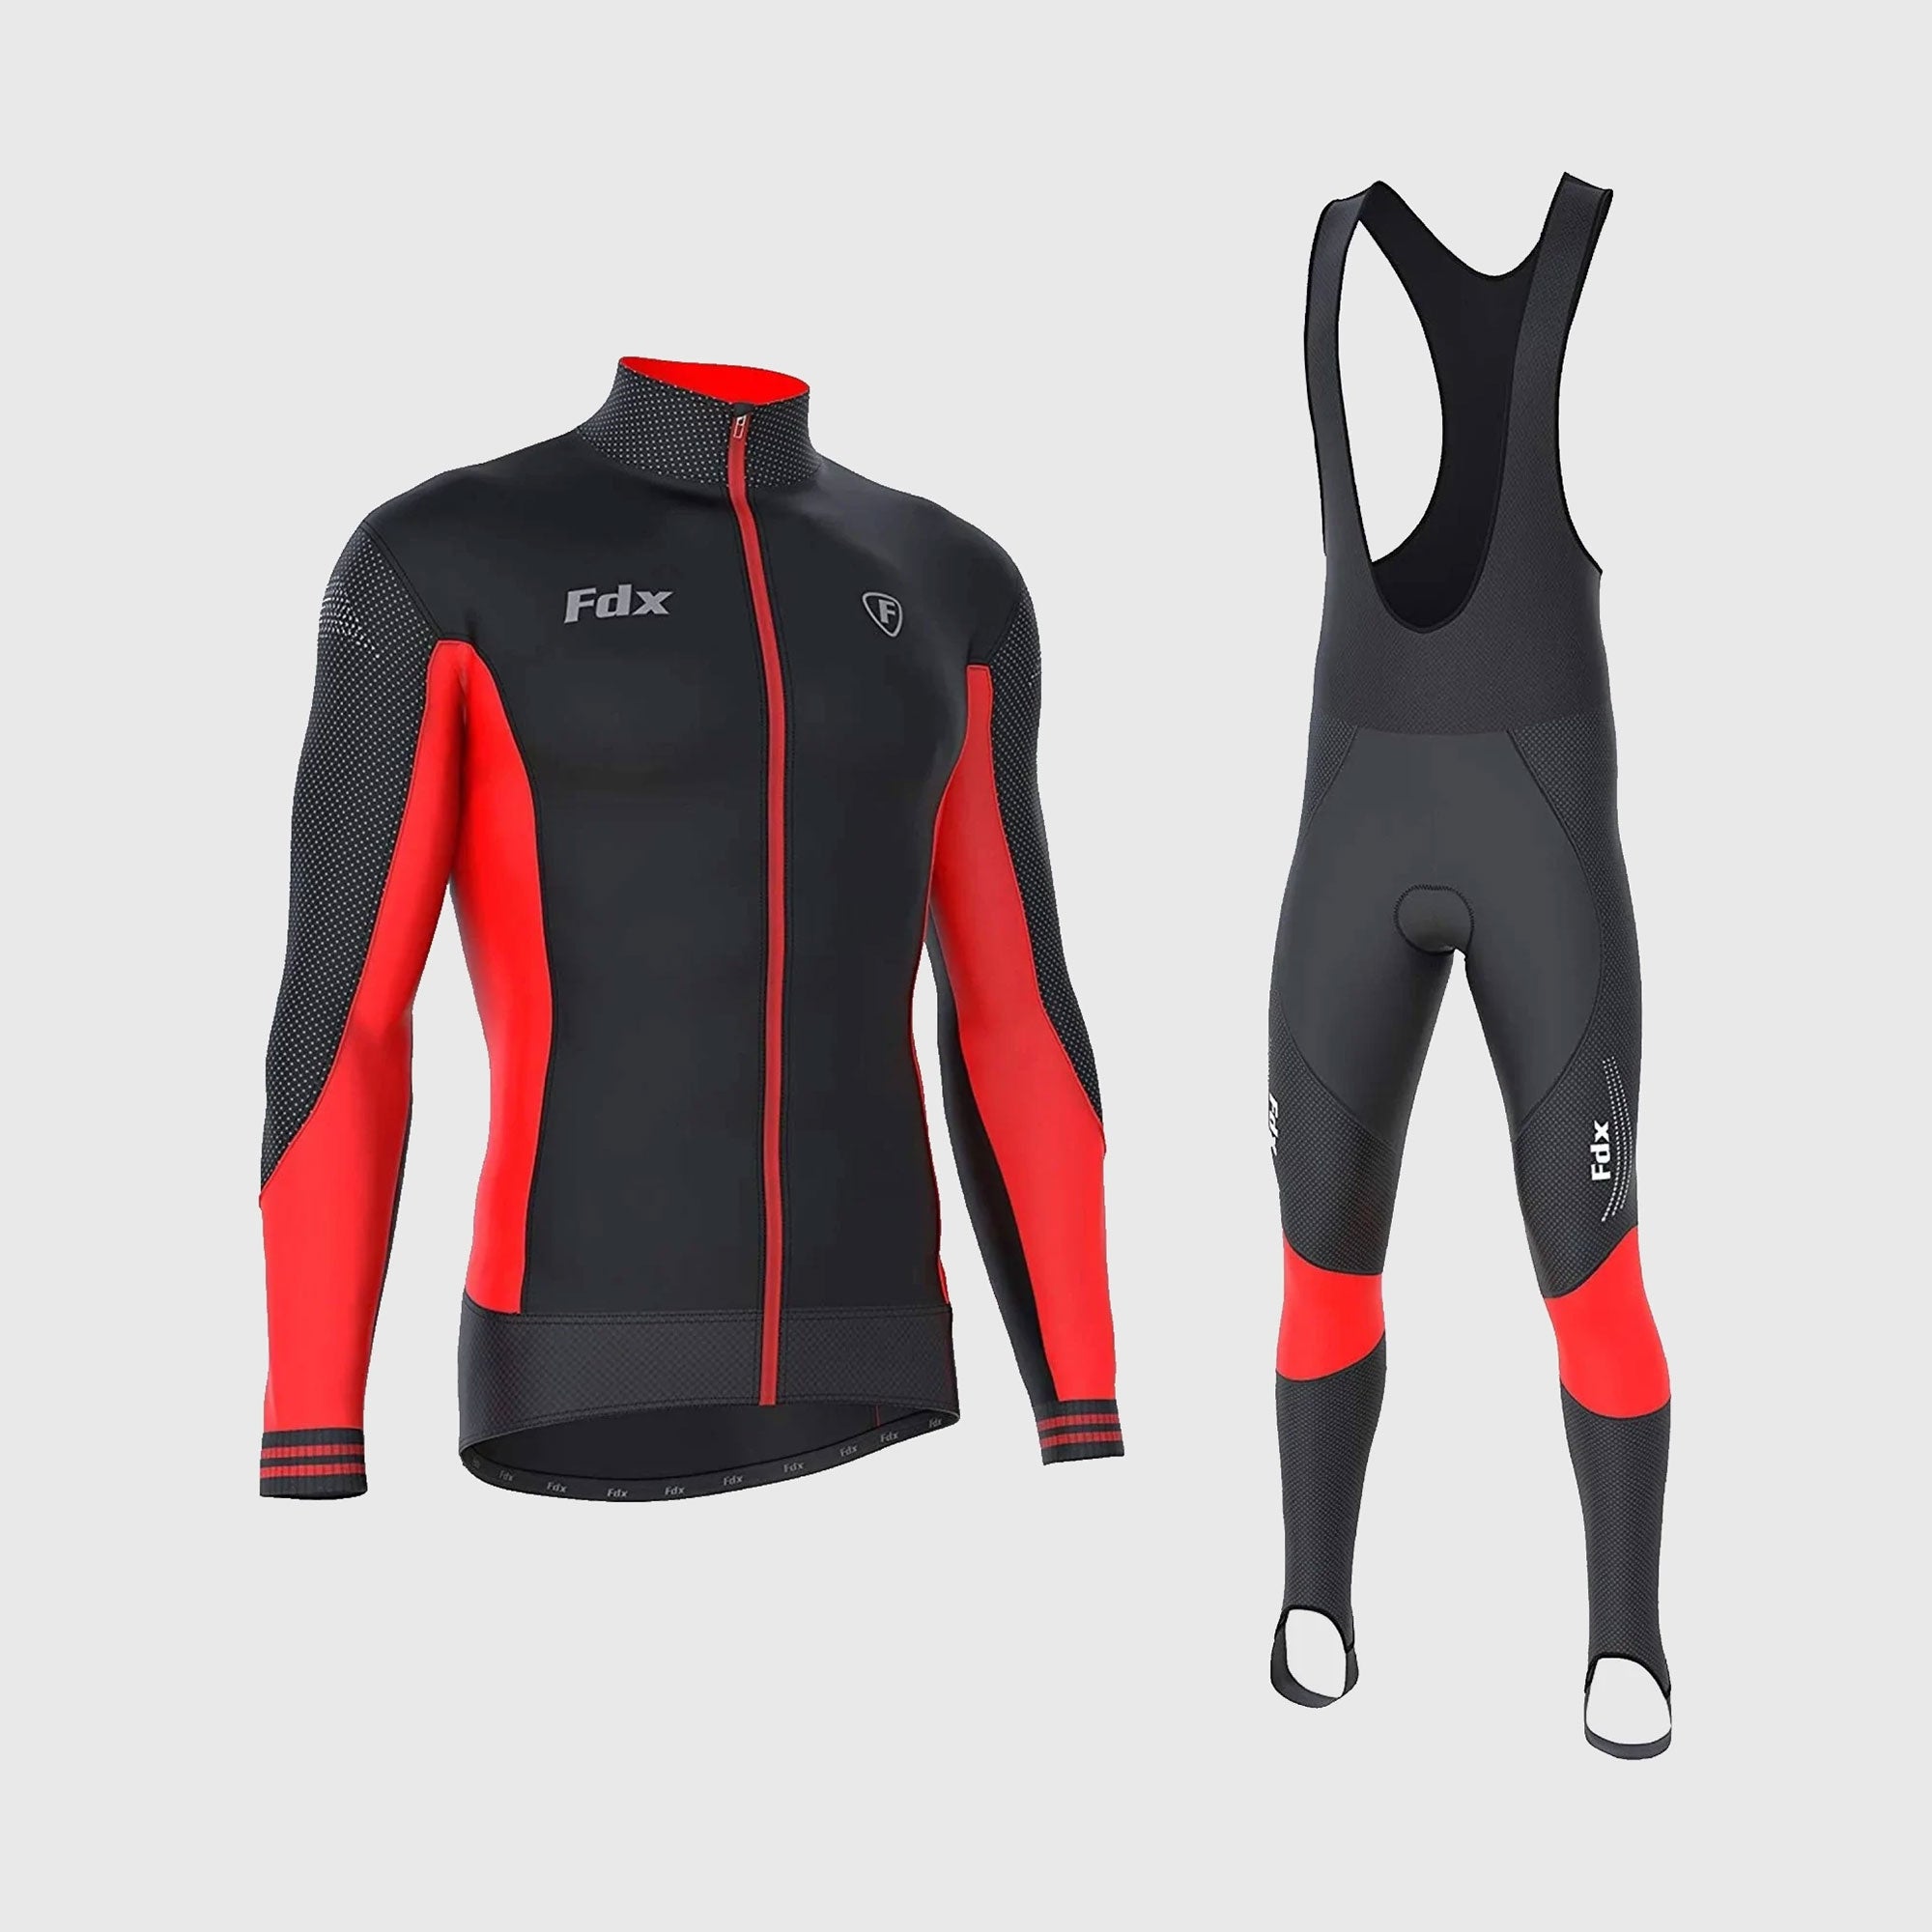 Fdx Men's Set Thermodream Thermal Roubaix Long Sleeve Cycling Jersey & Bib Tights - Red